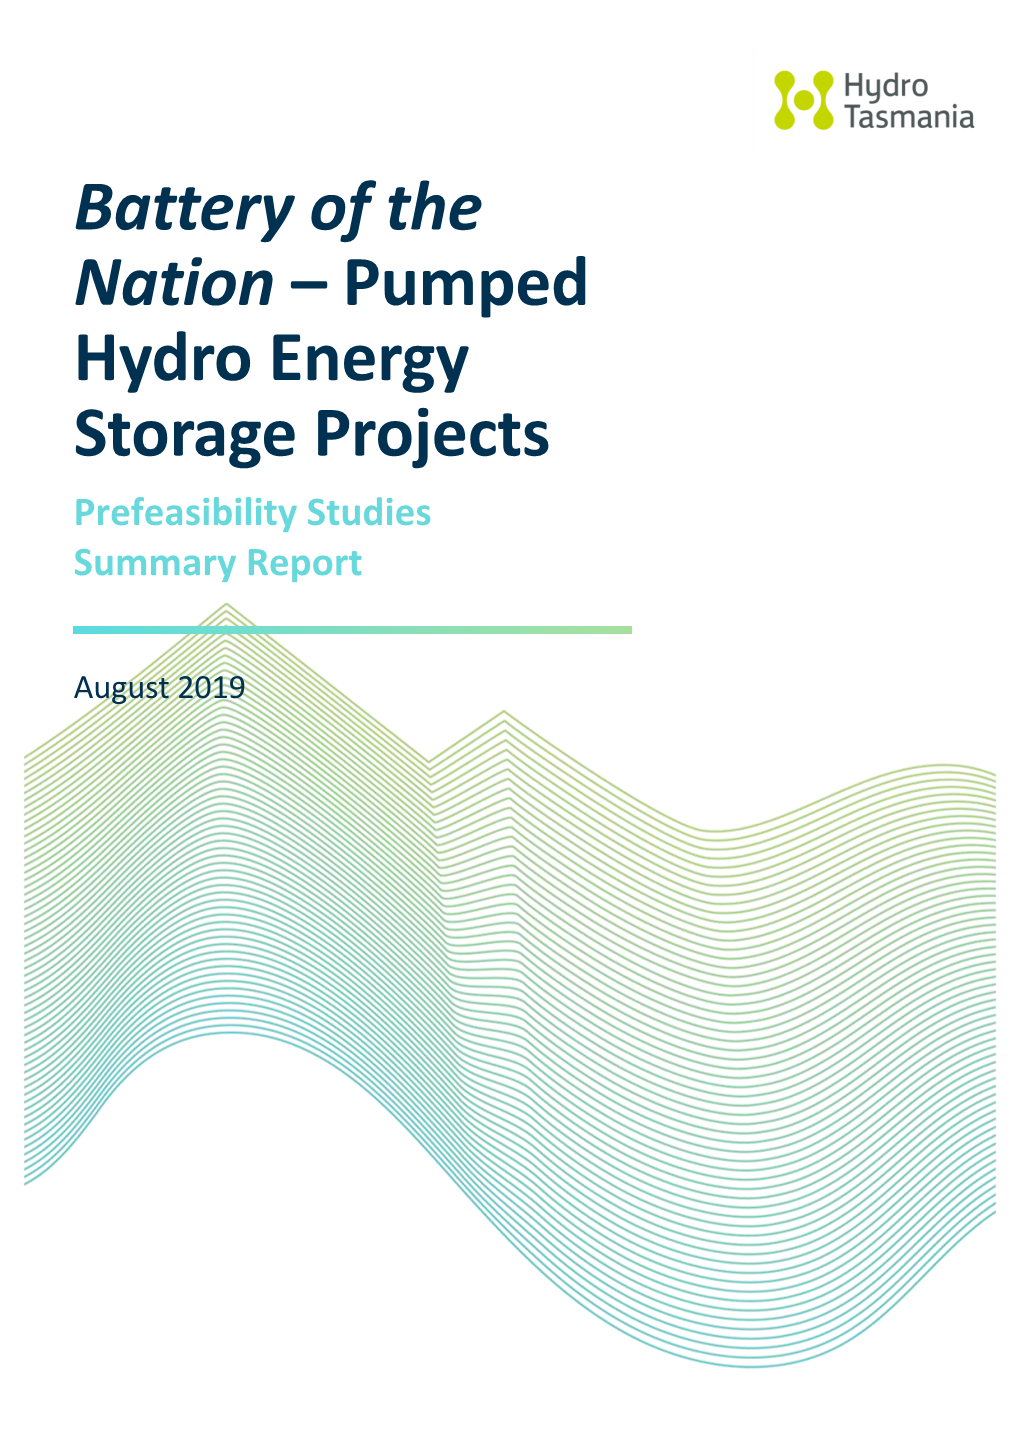 Battery of the Nation – Pumped Hydro Energy Storage Projects Prefeasibility Studies Summary Report